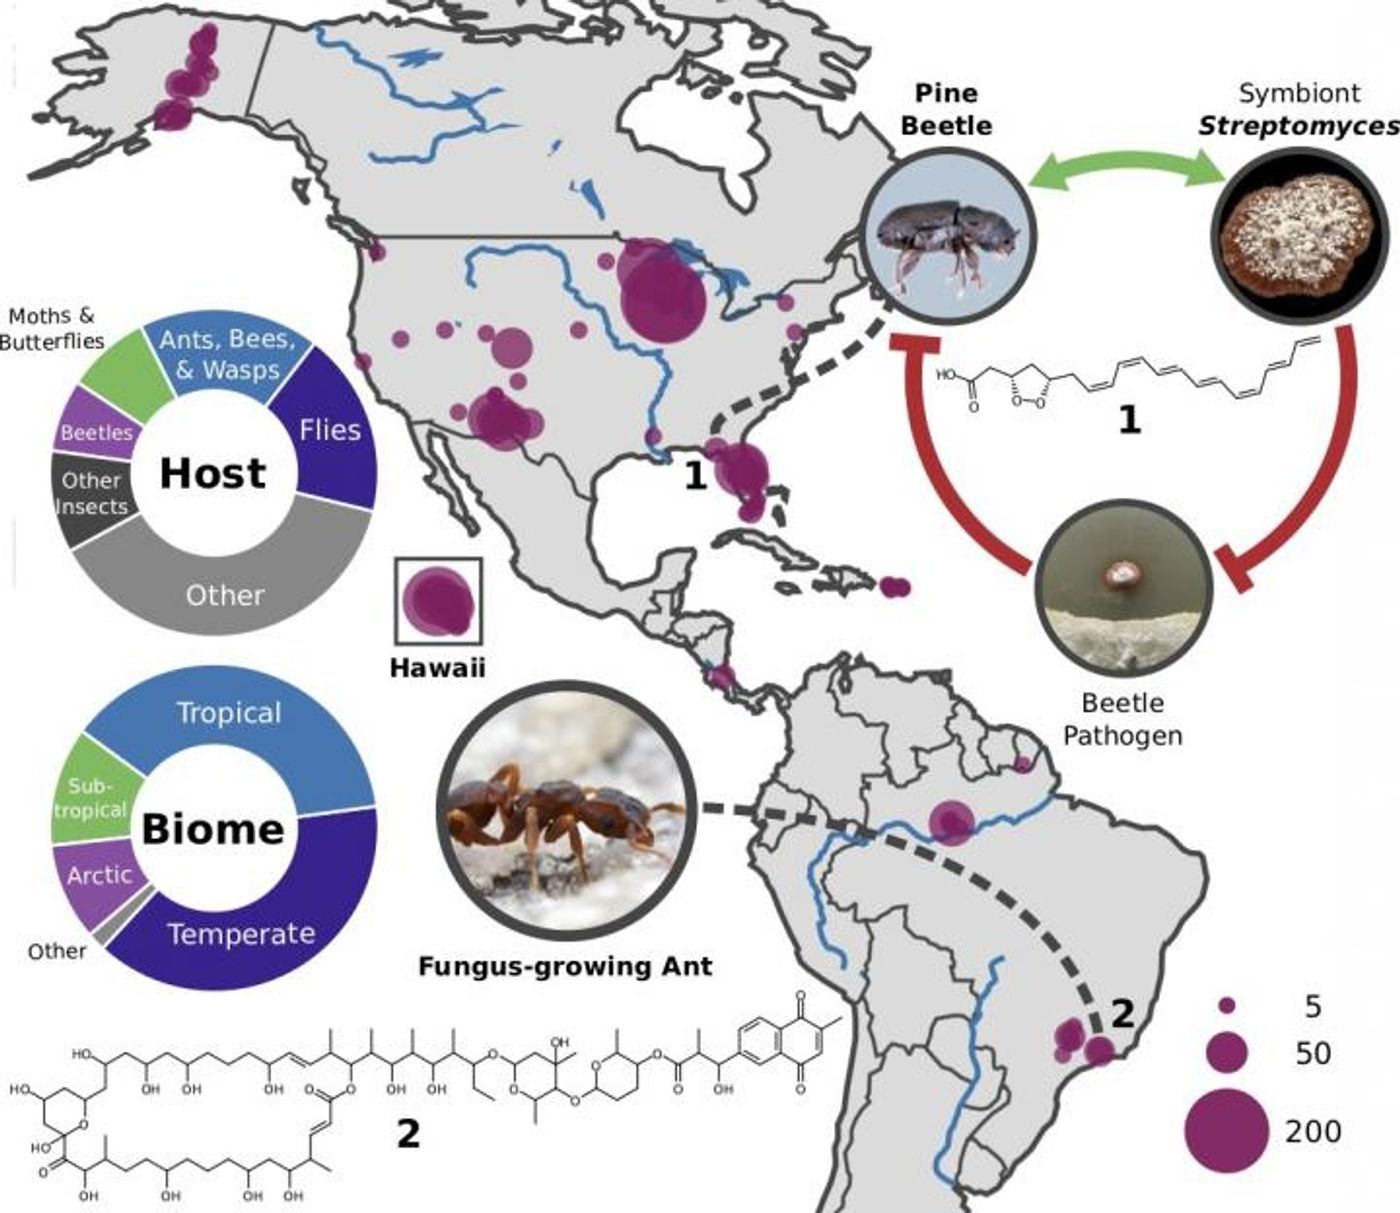 Researchers collected more than 2500 insects of all kinds from diverse habitats across North and South America to prospect for microbes that might produce novel antibiotics. / Credit: Cameron Currie and Marc Chevrette